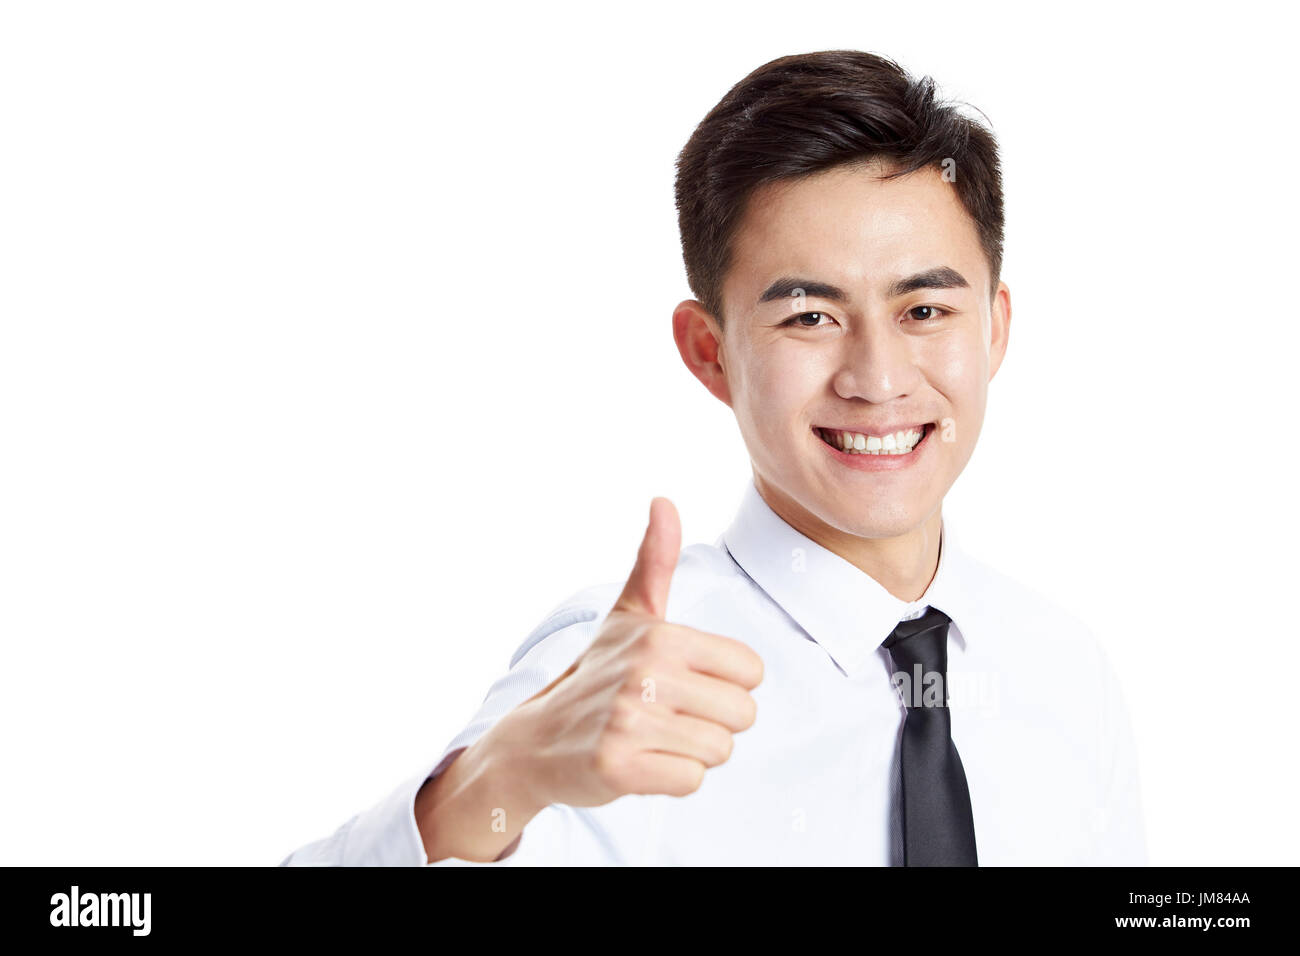 young asian businessman showing thumb-up sign, happy and smiling, studio shot, isolated on white background. Stock Photo